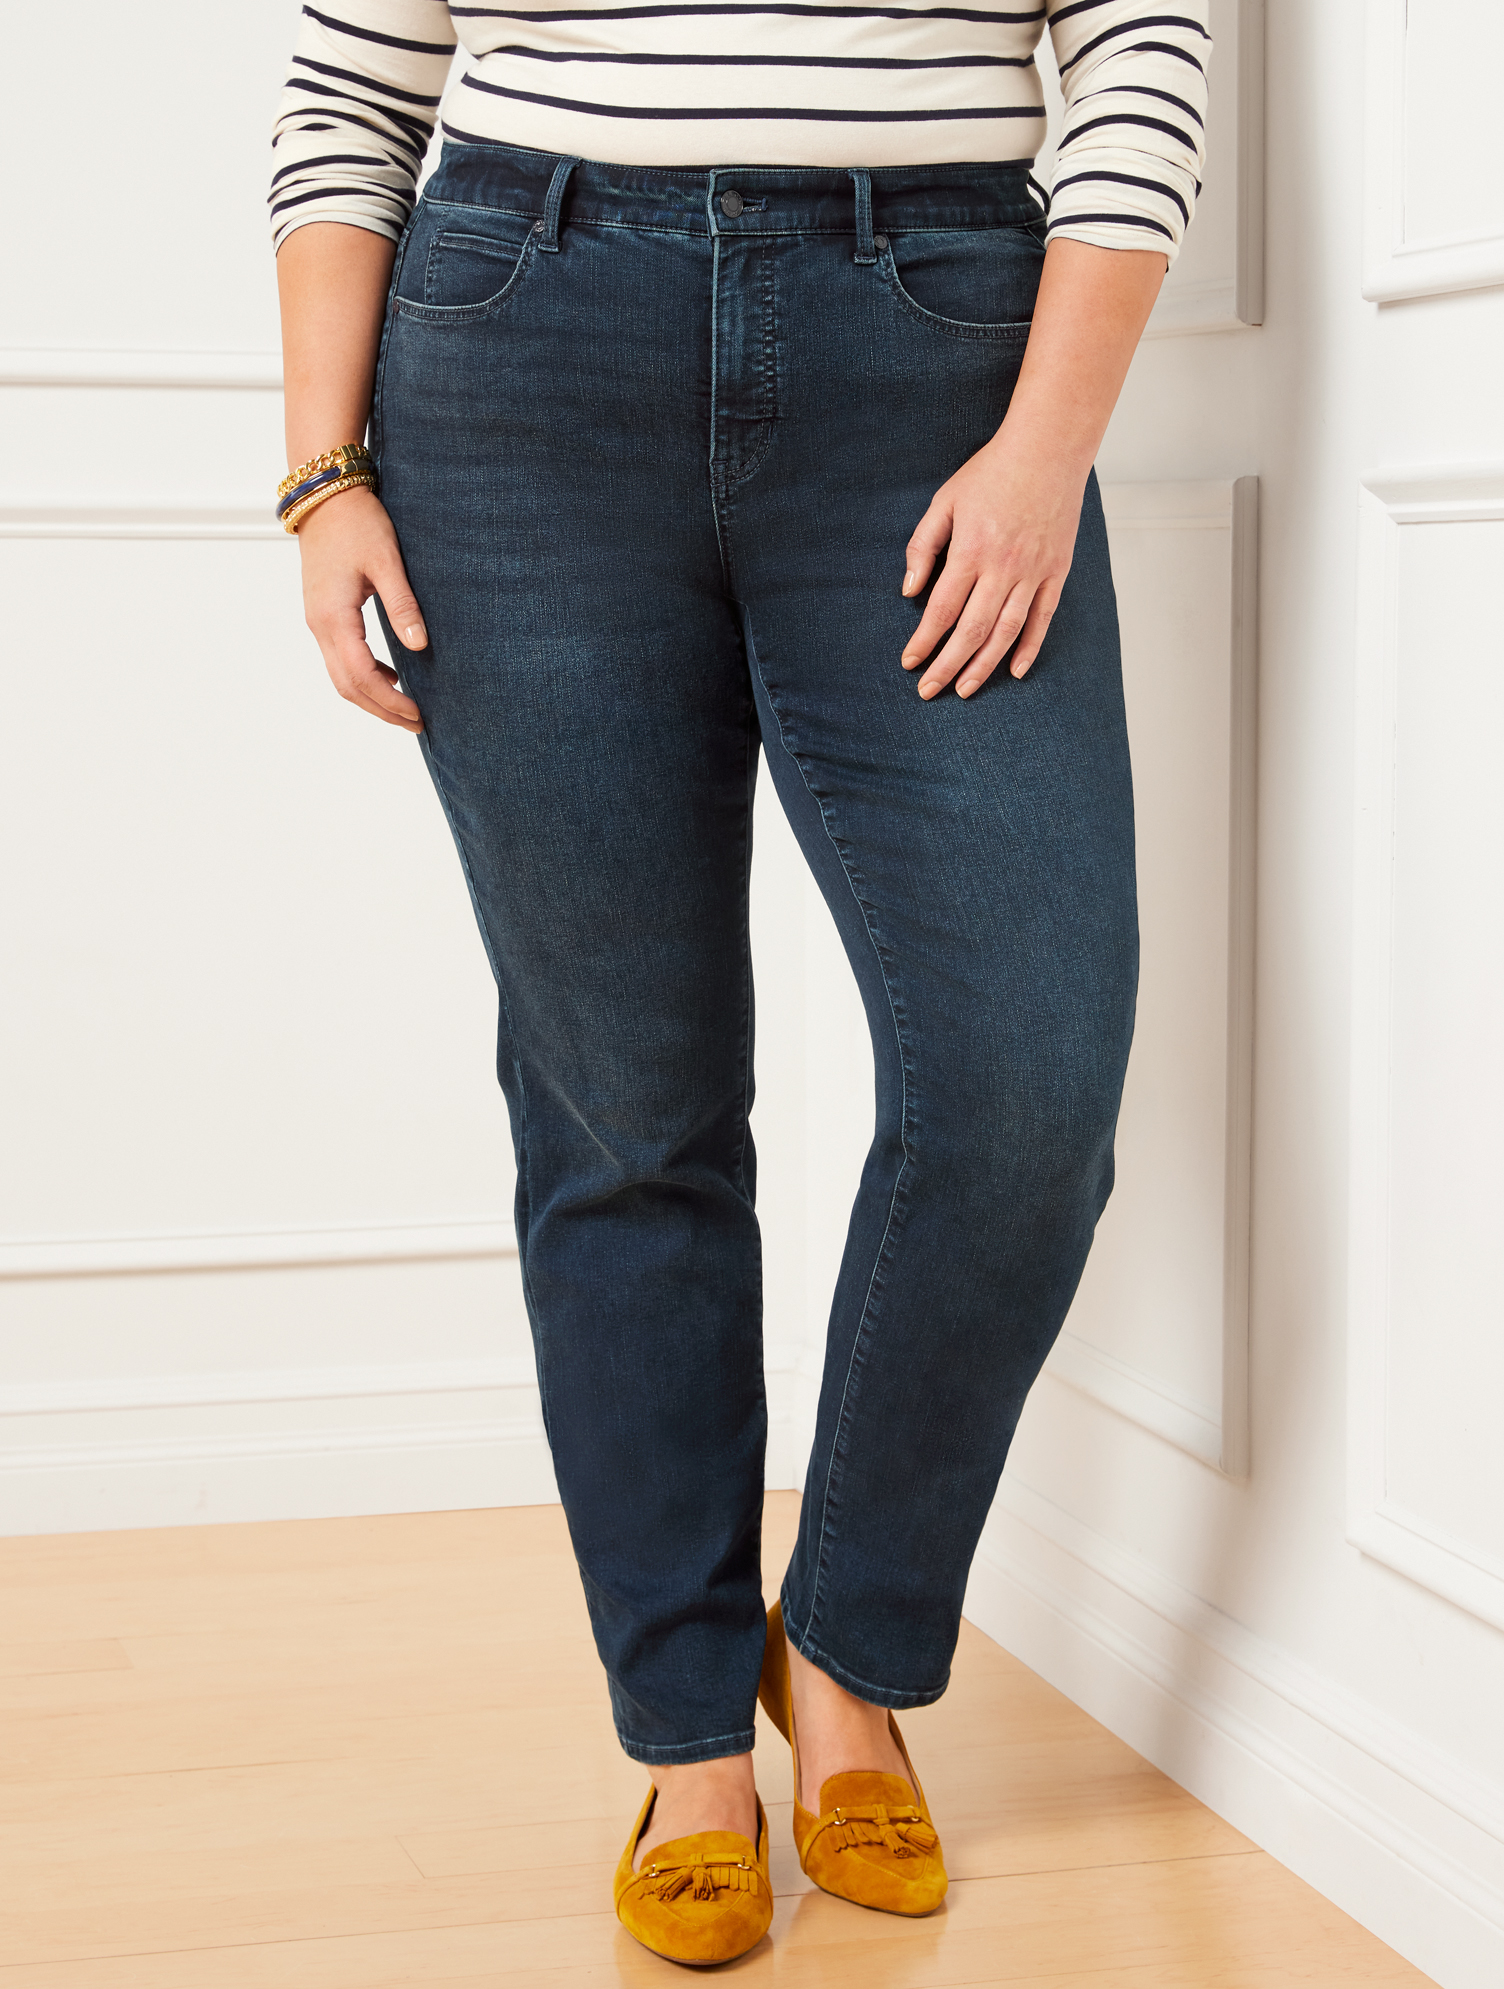 Talbots Plus Exclusive Straight Leg Jeans - Florence Wash - Curvy Fit - 22